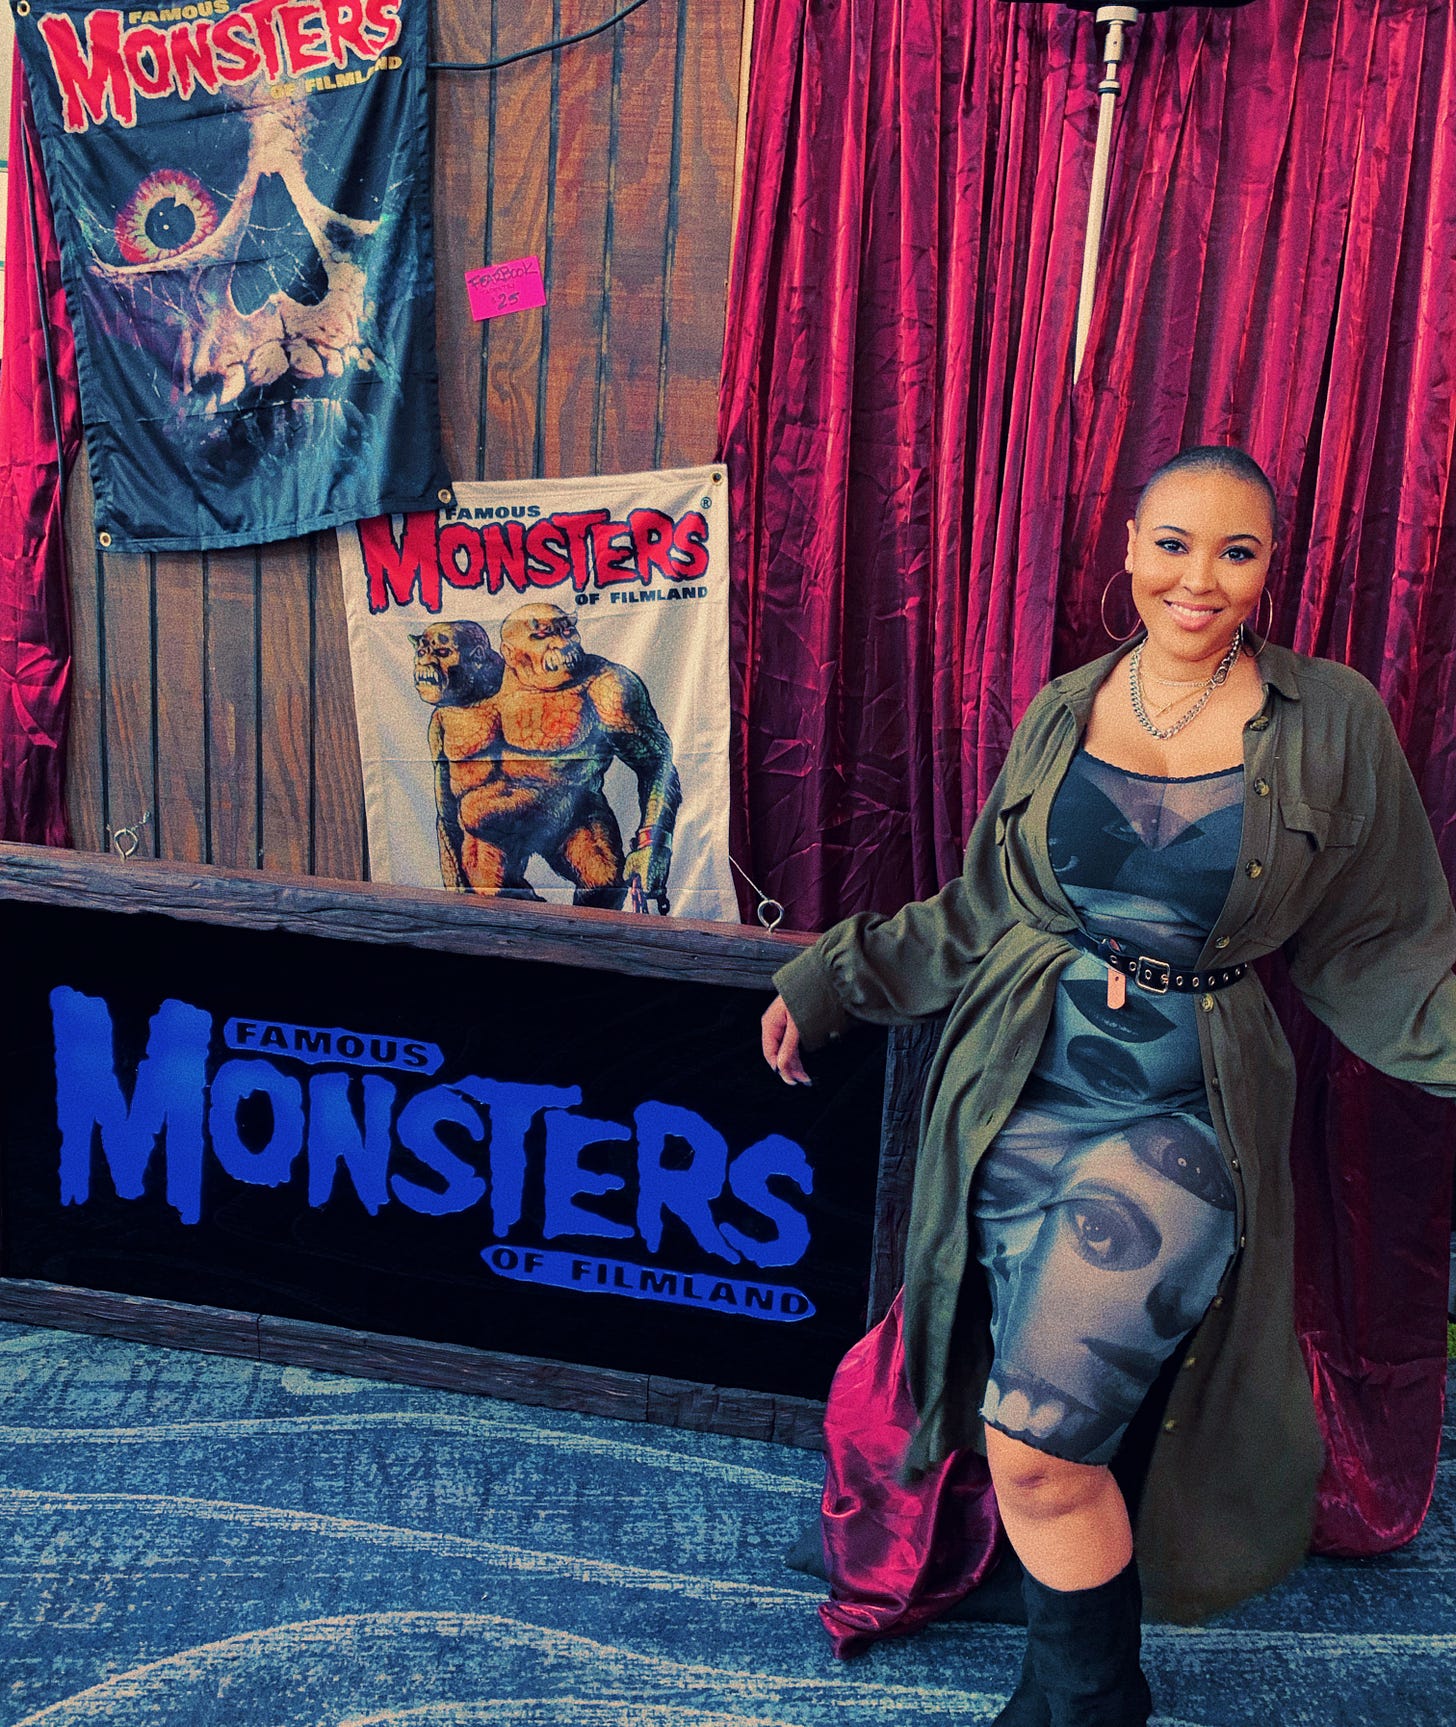 Beautiful bald woman (Lakyn, the author) standing in front of a backdrop for Famous Monsters magazine in a mesh dress with printed eyeballs and lips, layered gold and silver necklaces, a gold grommet belt and an olive maxi shirt dress. She's smiling and looks super hot.